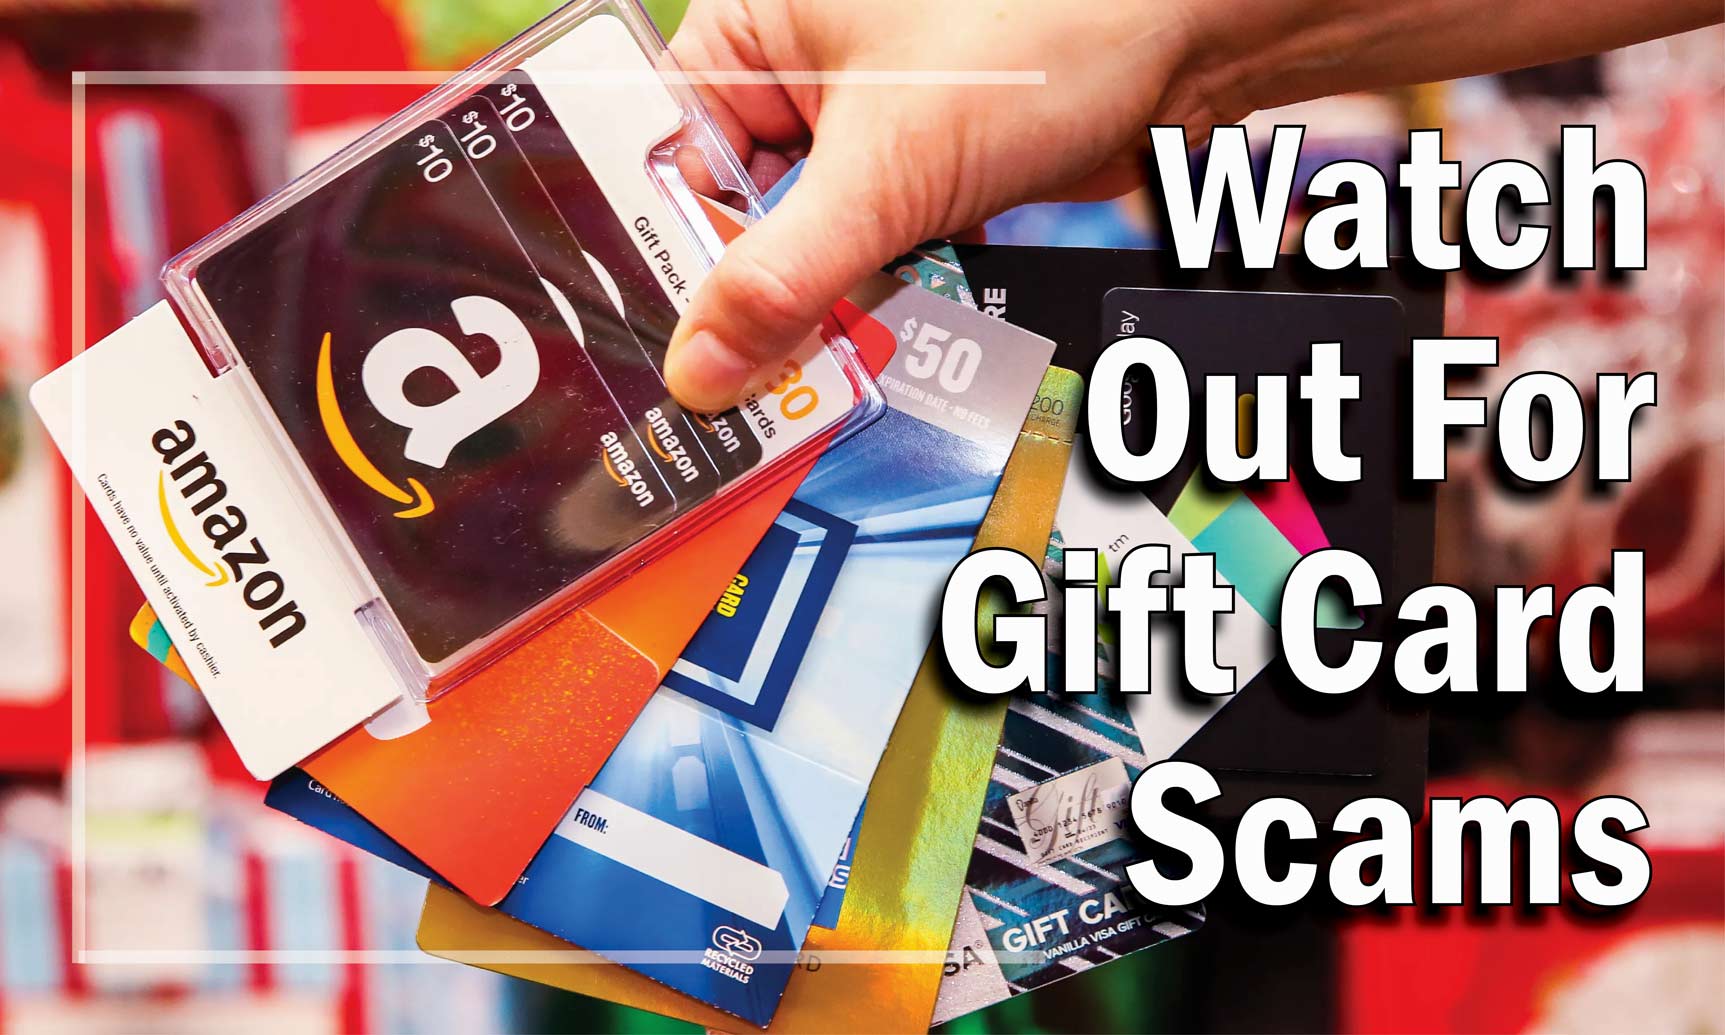 Gift Card Scam Alert/Update – NYU IT Security News and Alerts